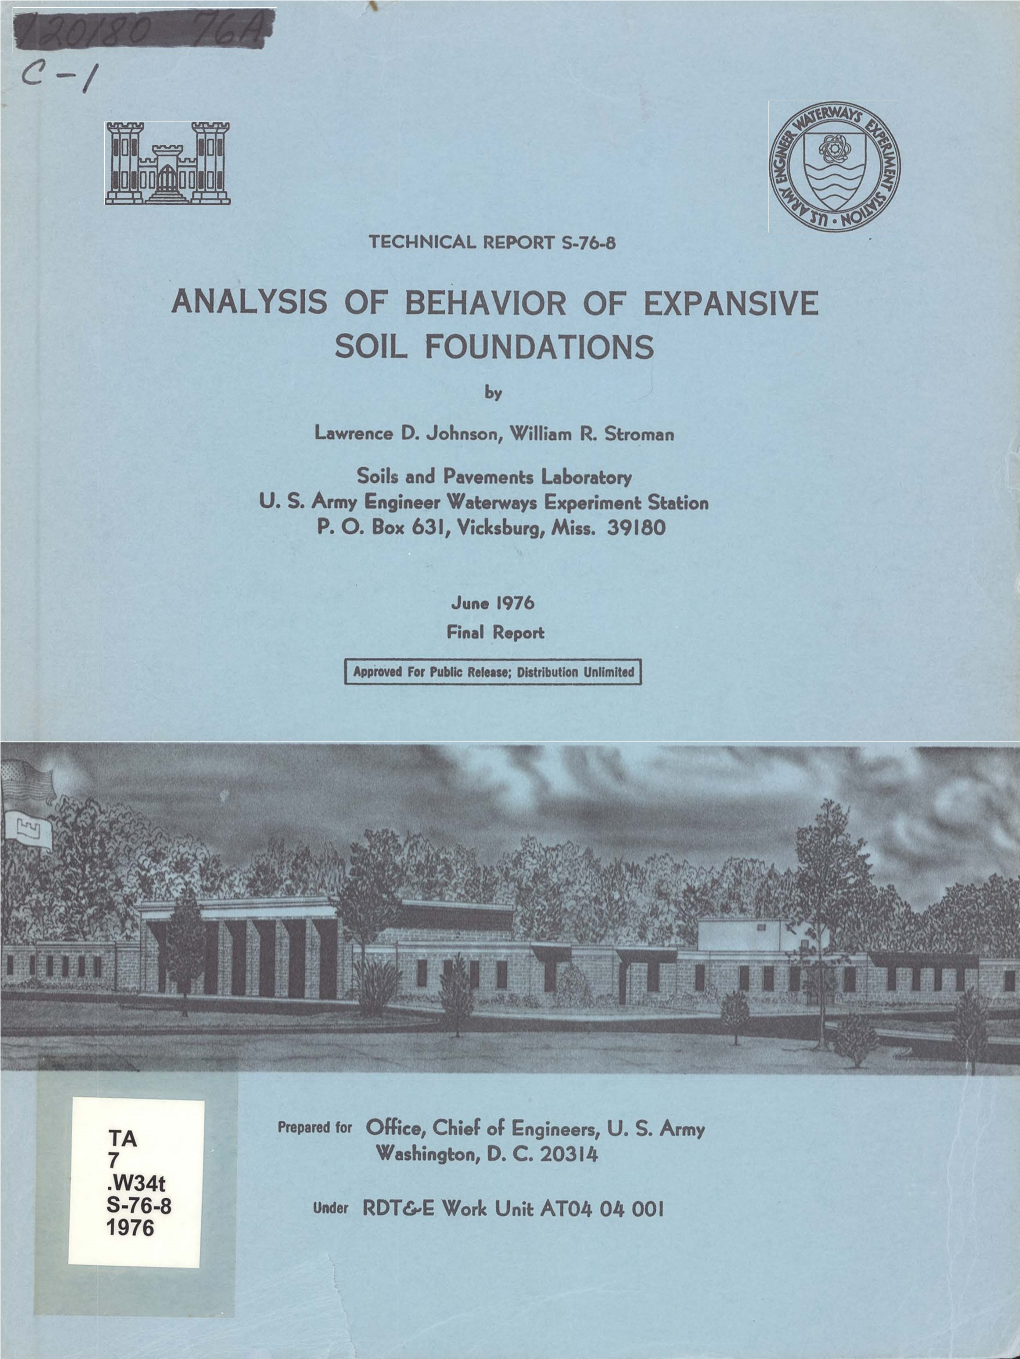 Analysis of Behavior of Expansive Soil Foundations